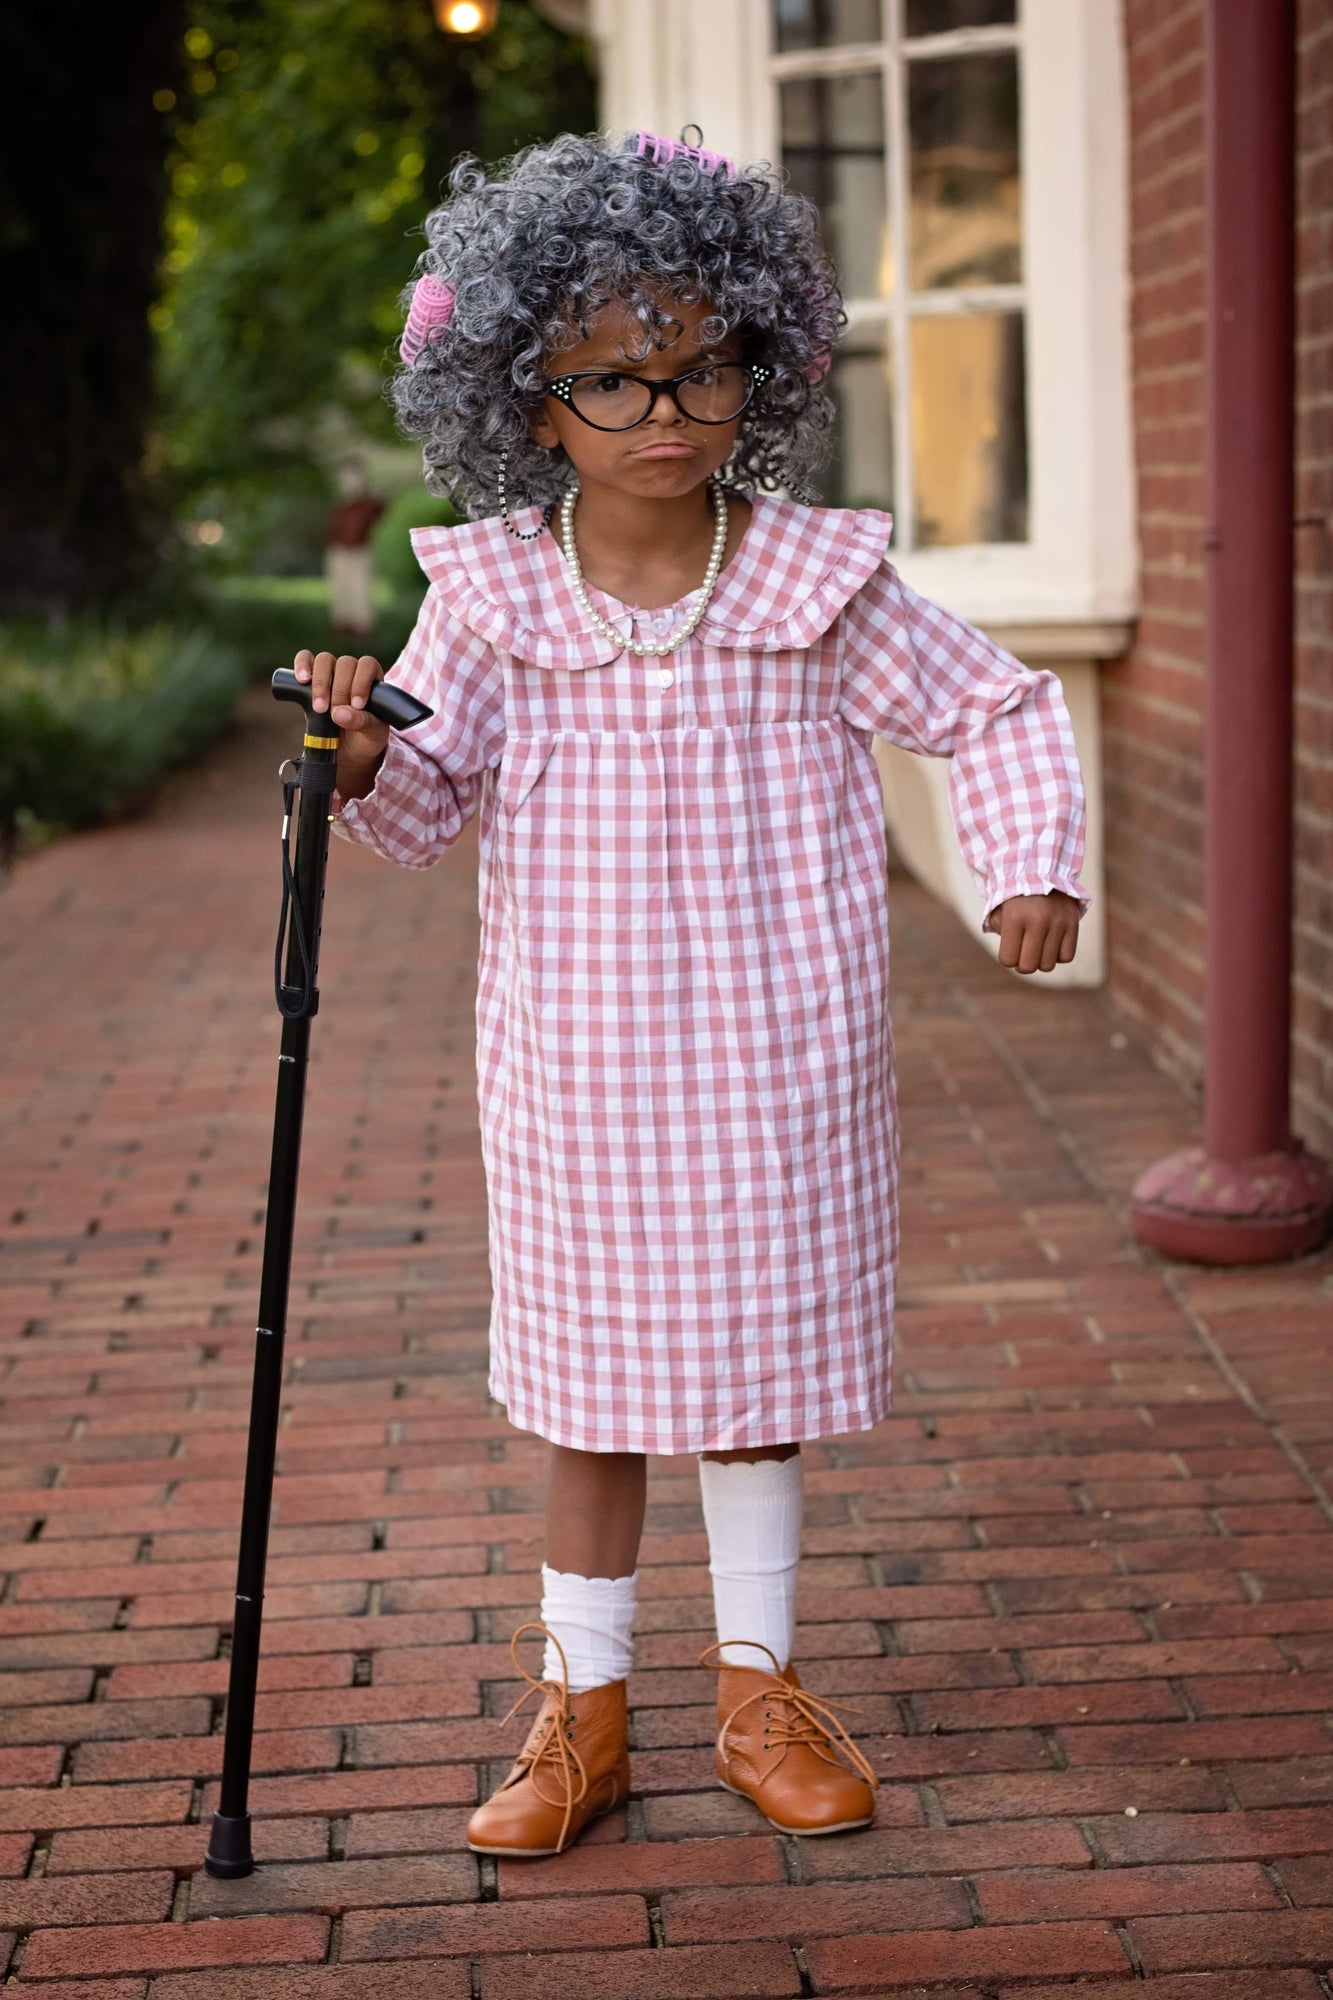 Old lady costume for kids